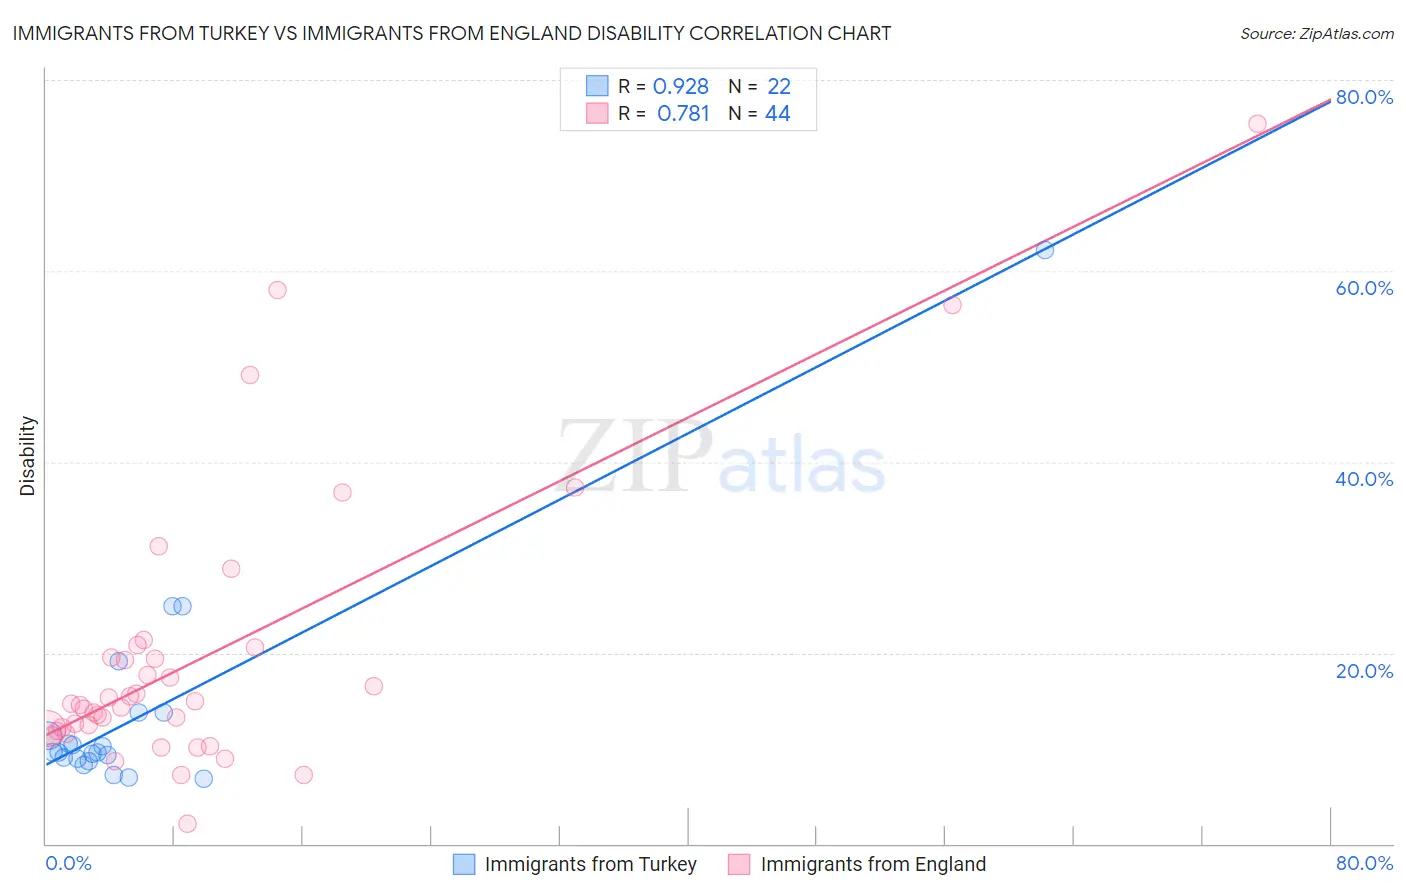 Immigrants from Turkey vs Immigrants from England Disability